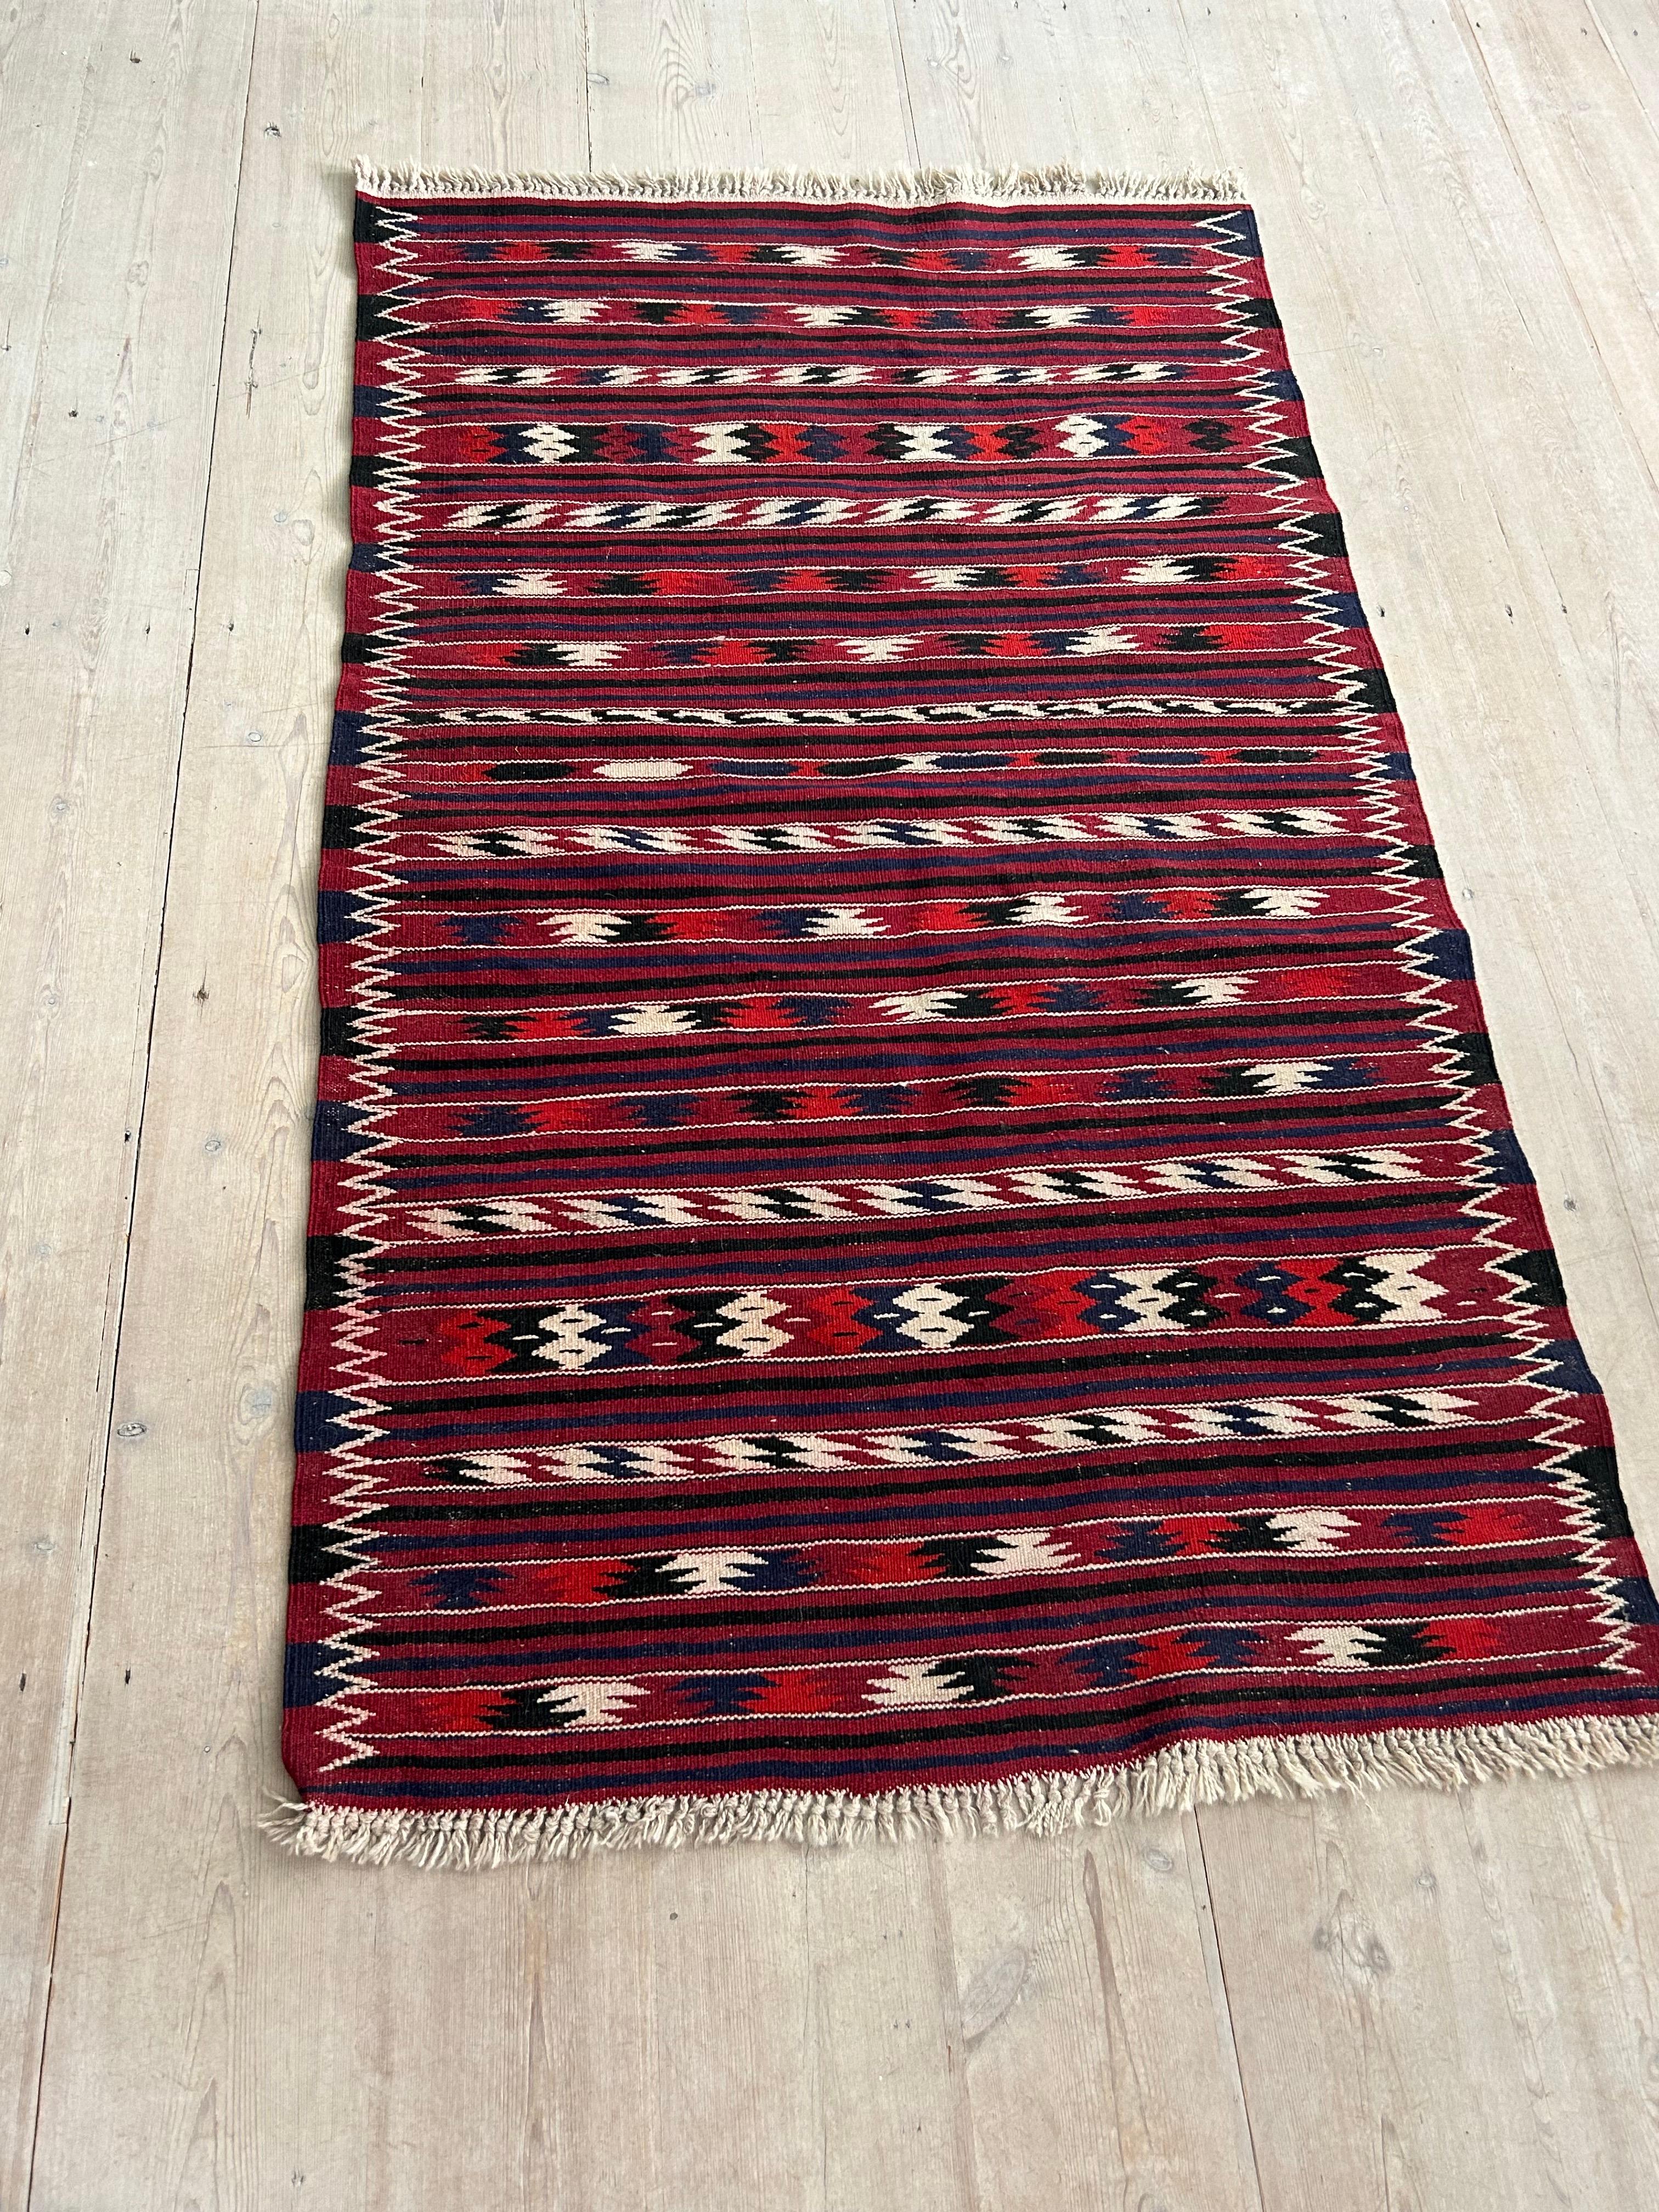 Unknown Vintage Hand-Woven Oriental Red Striped Kelim Rug, 20th Century For Sale